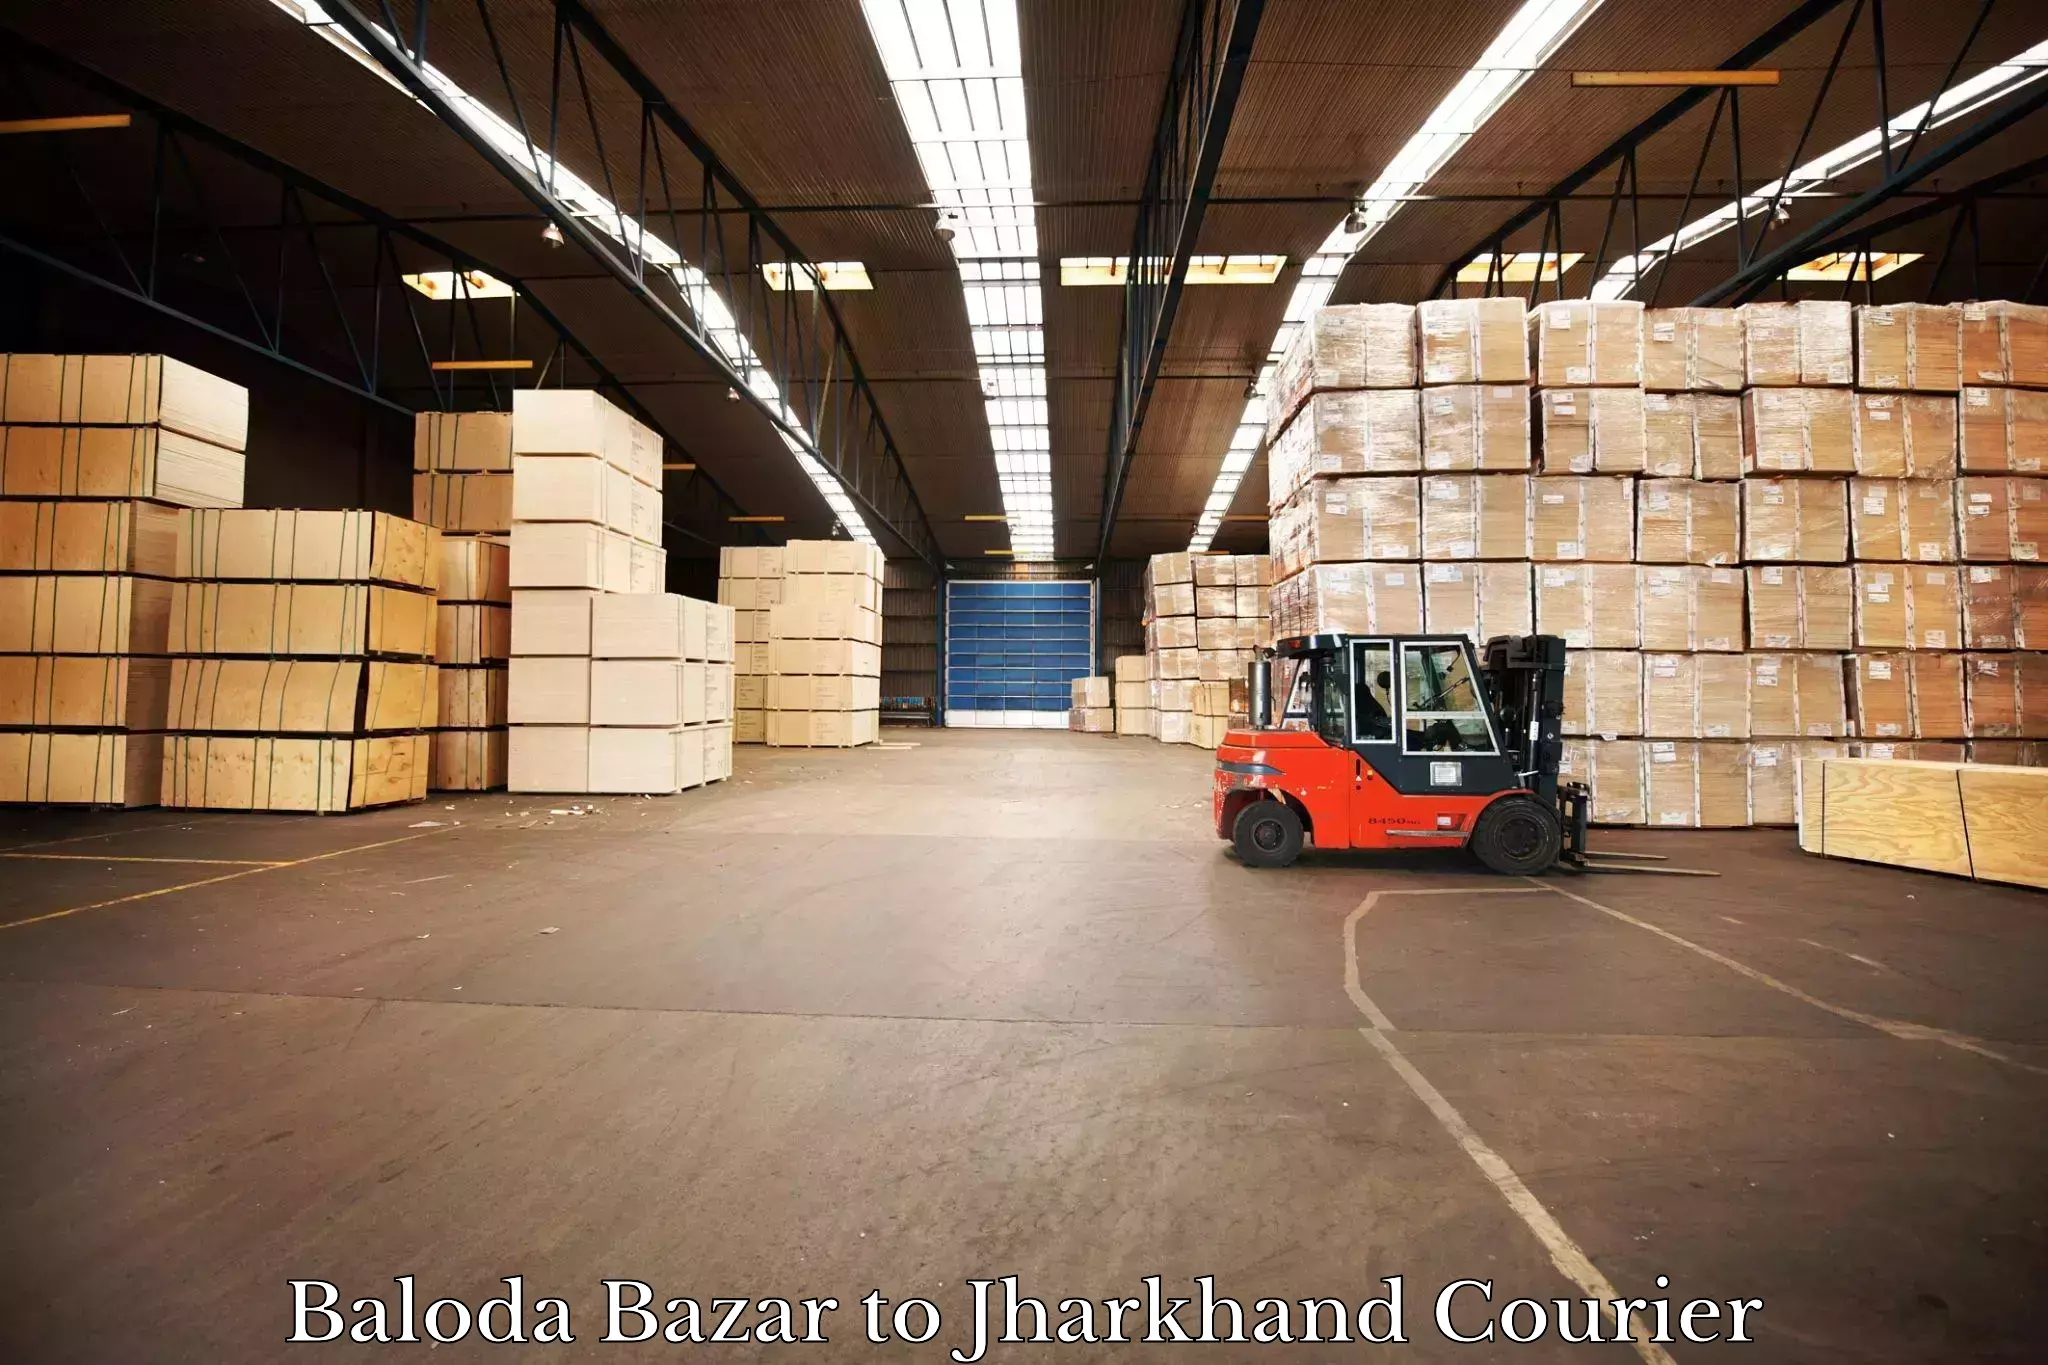 Round-the-clock parcel delivery Baloda Bazar to Jamshedpur